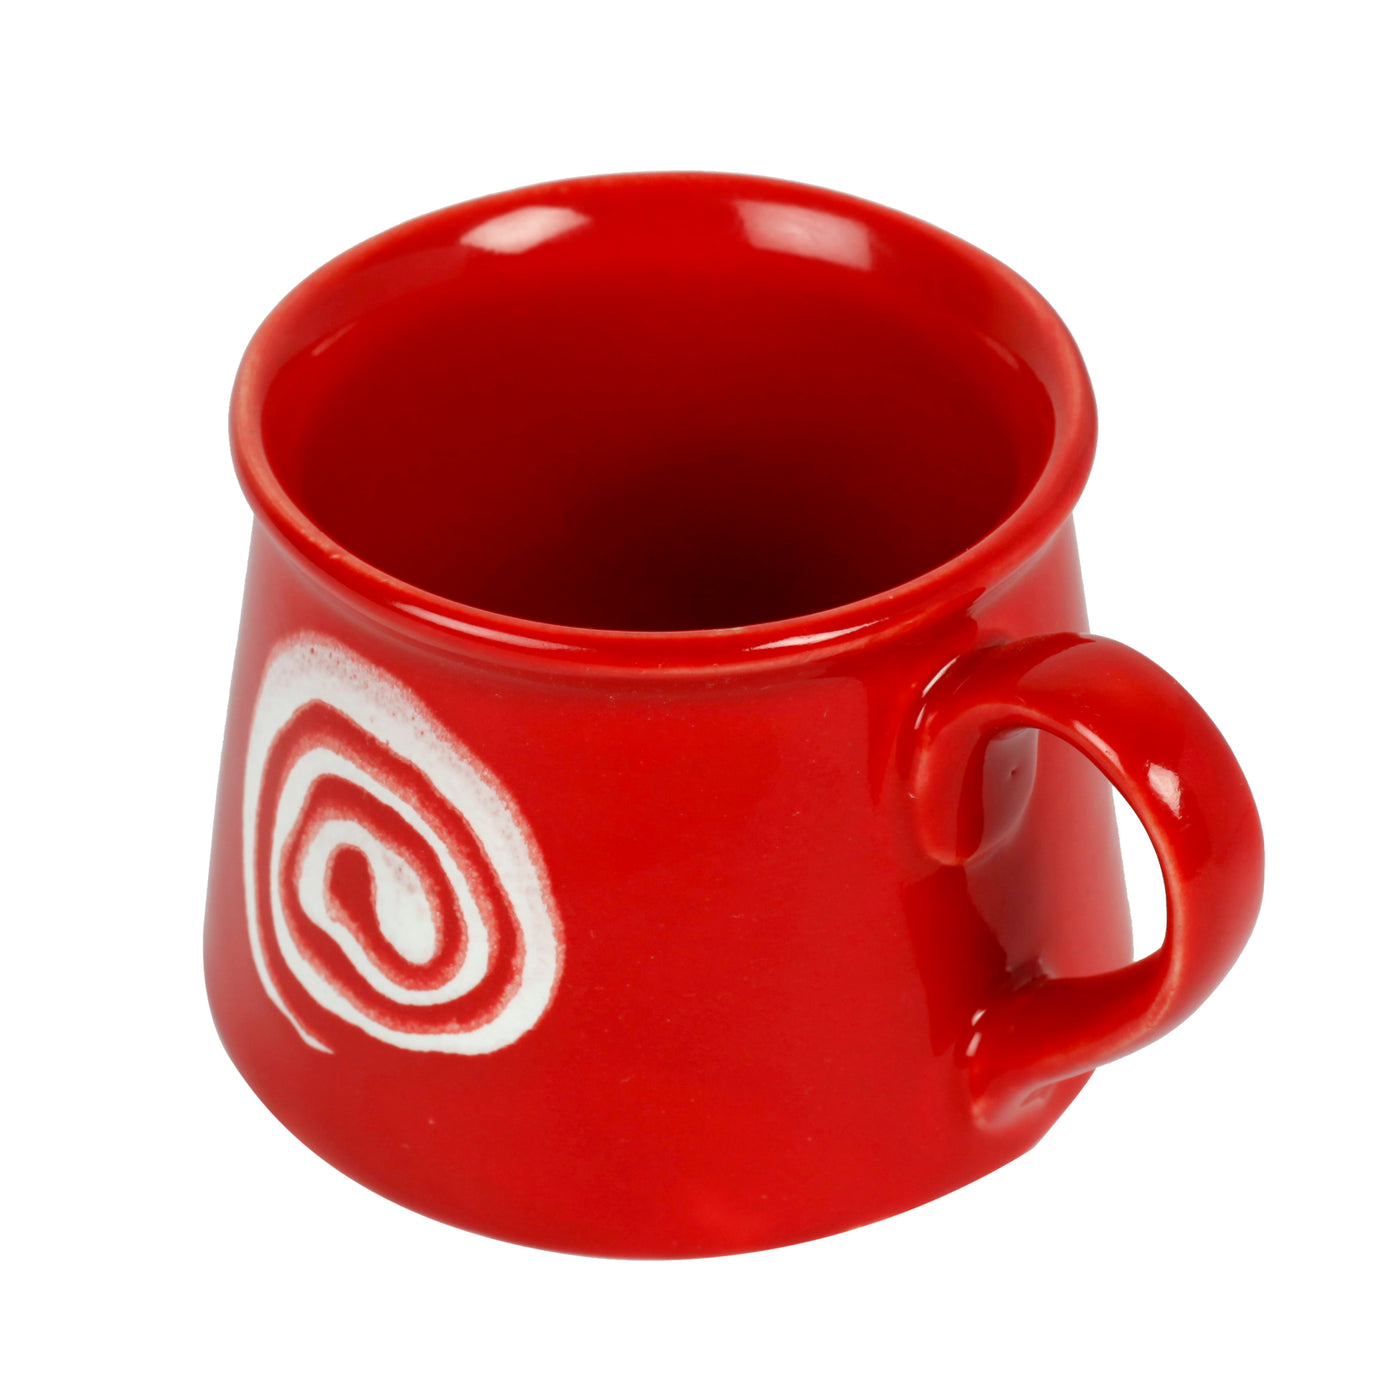 Unique Pottery Cup - Red